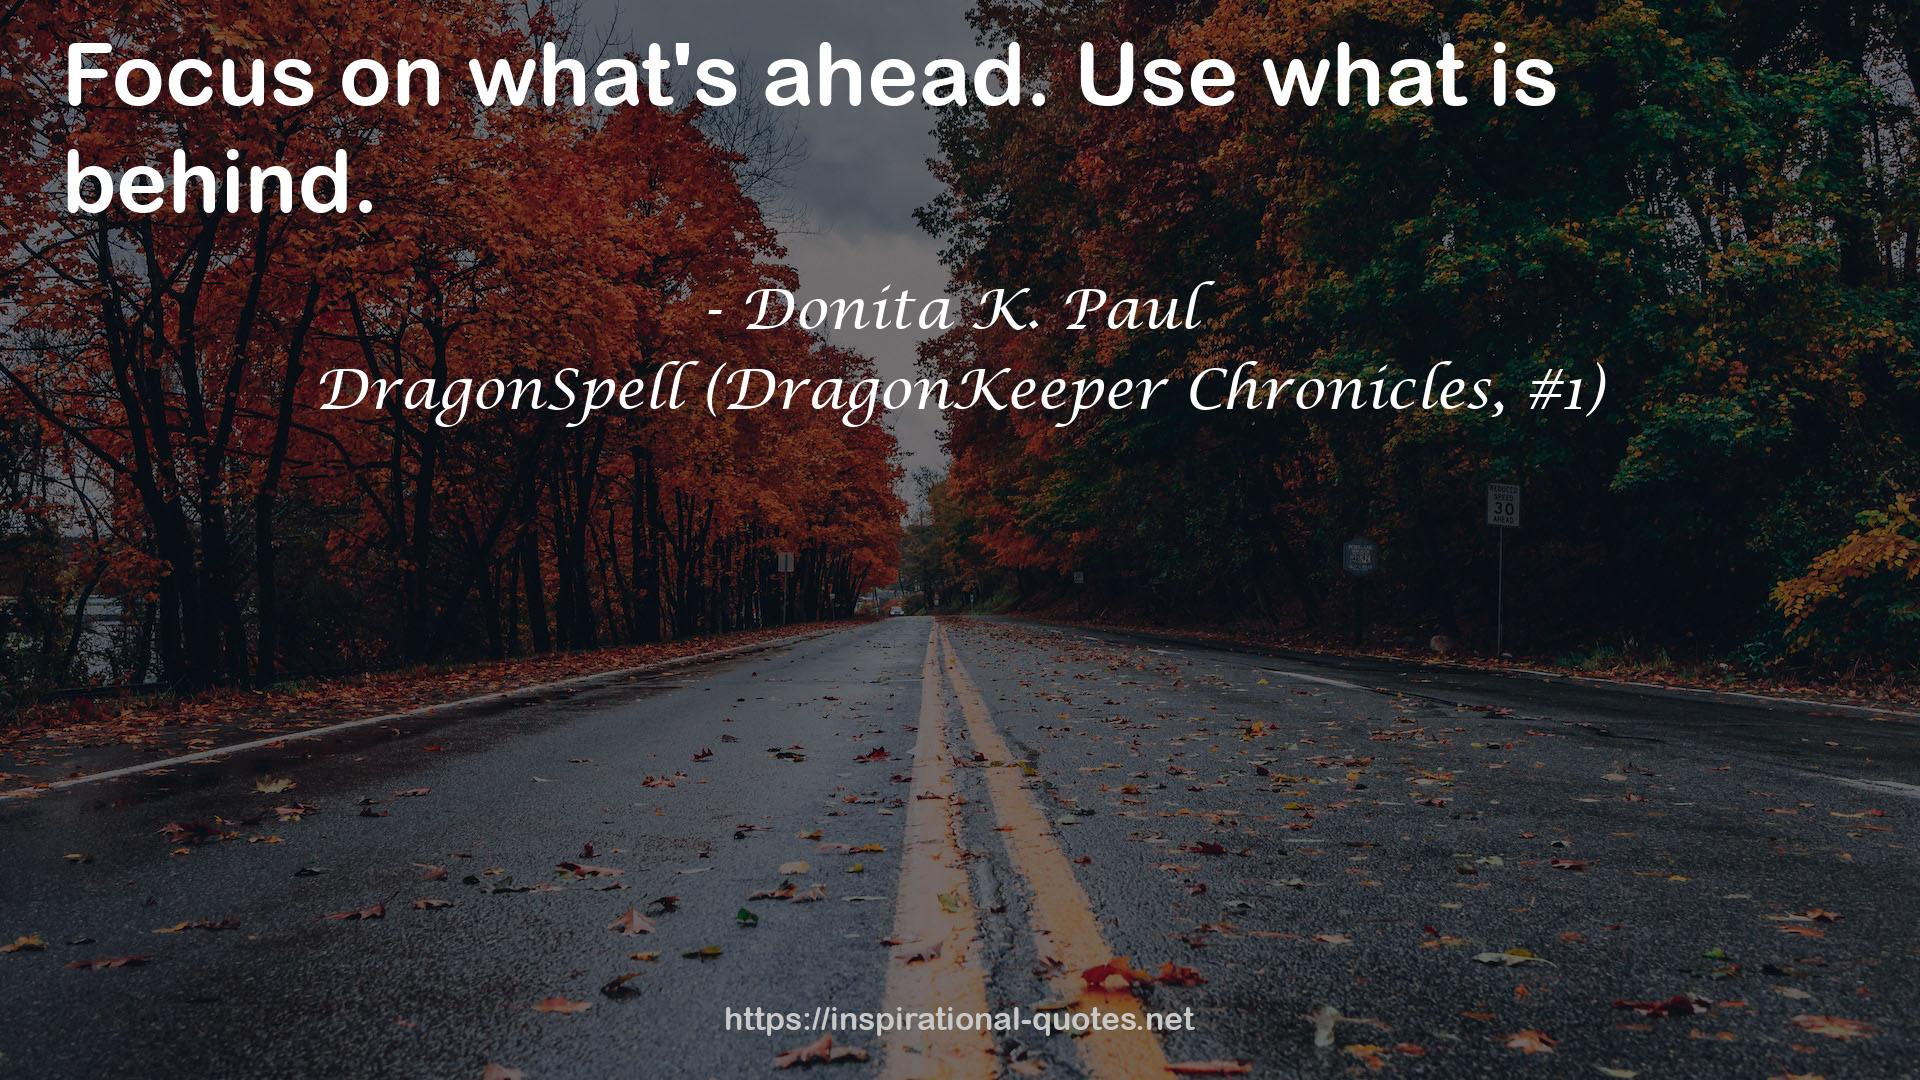 DragonSpell (DragonKeeper Chronicles, #1) QUOTES